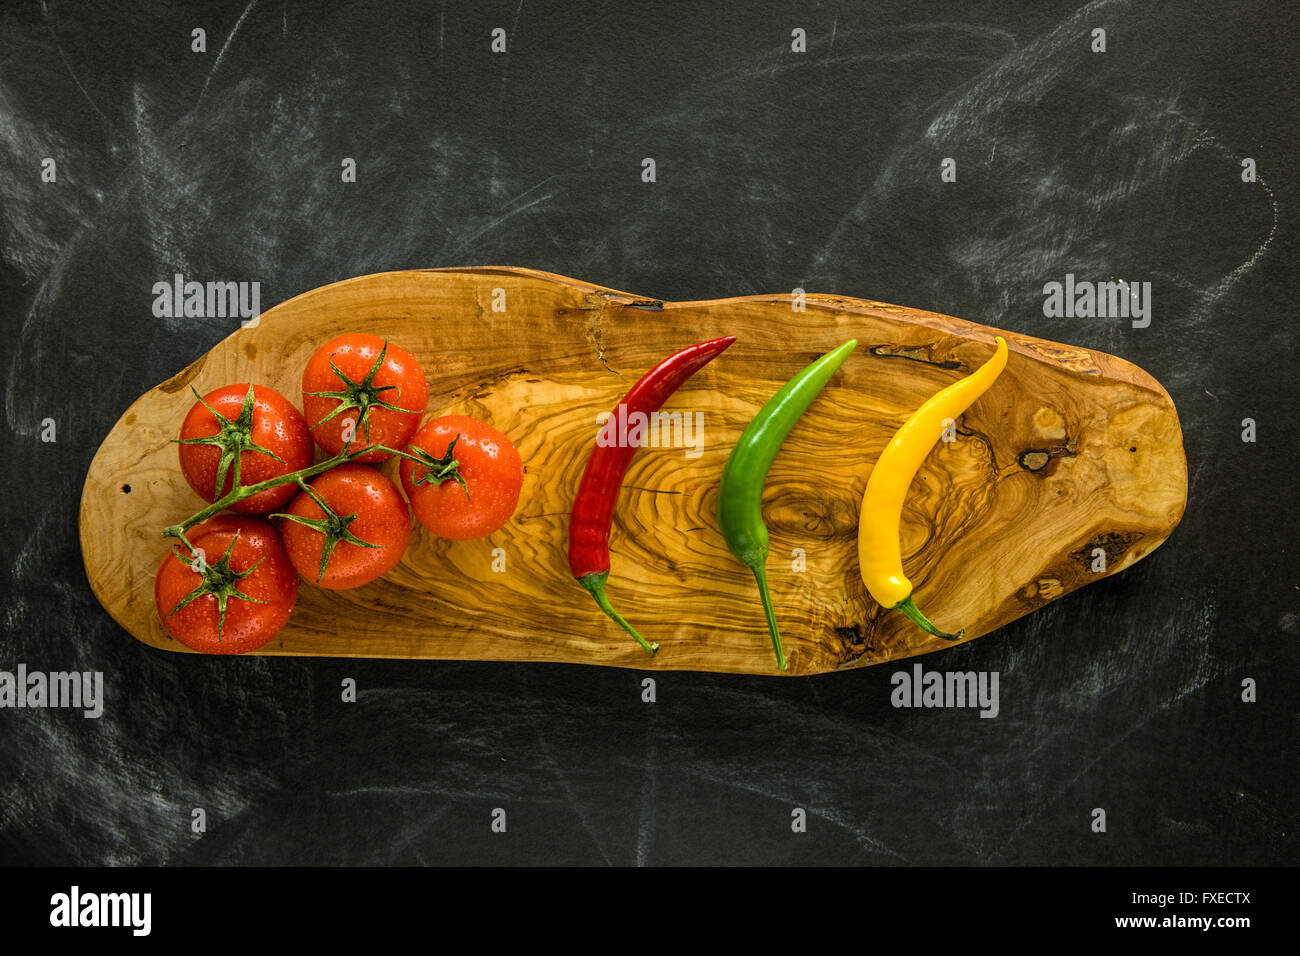 Tomatoes and hot chili peppers on wooden board. Stock Photo